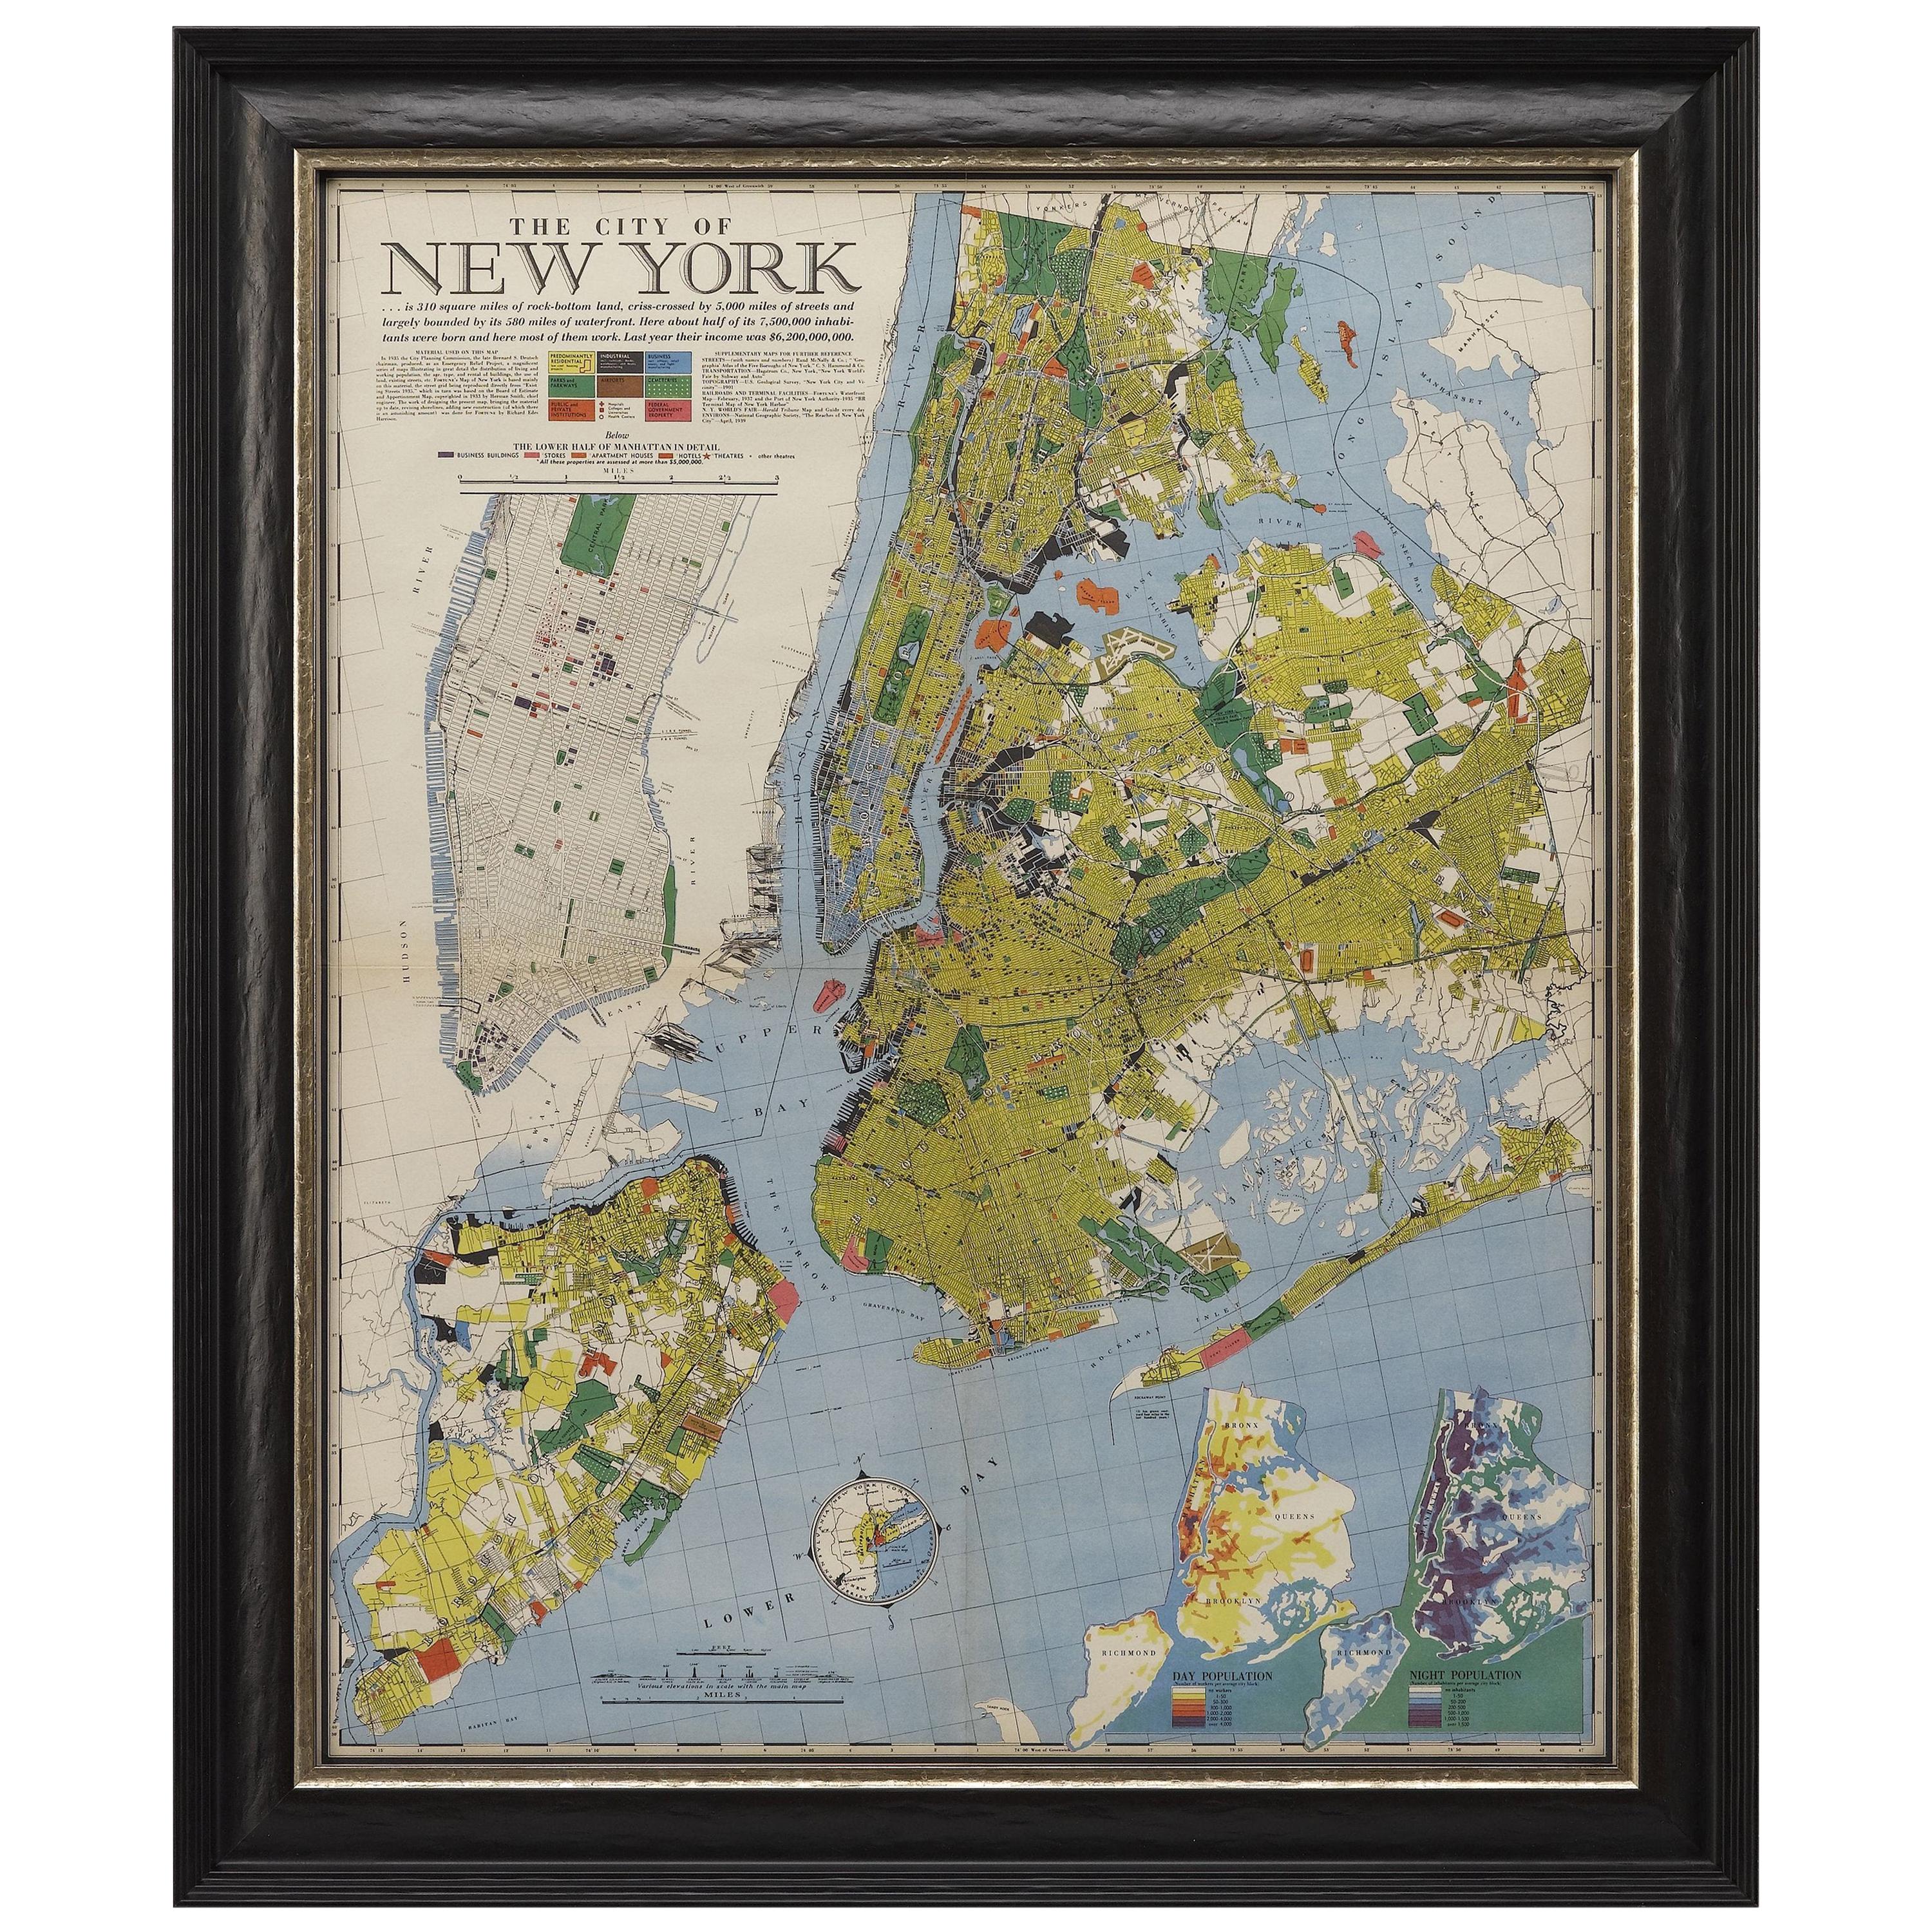 1939 Vintage Map "The City of New York" by Richard Edes Harrison